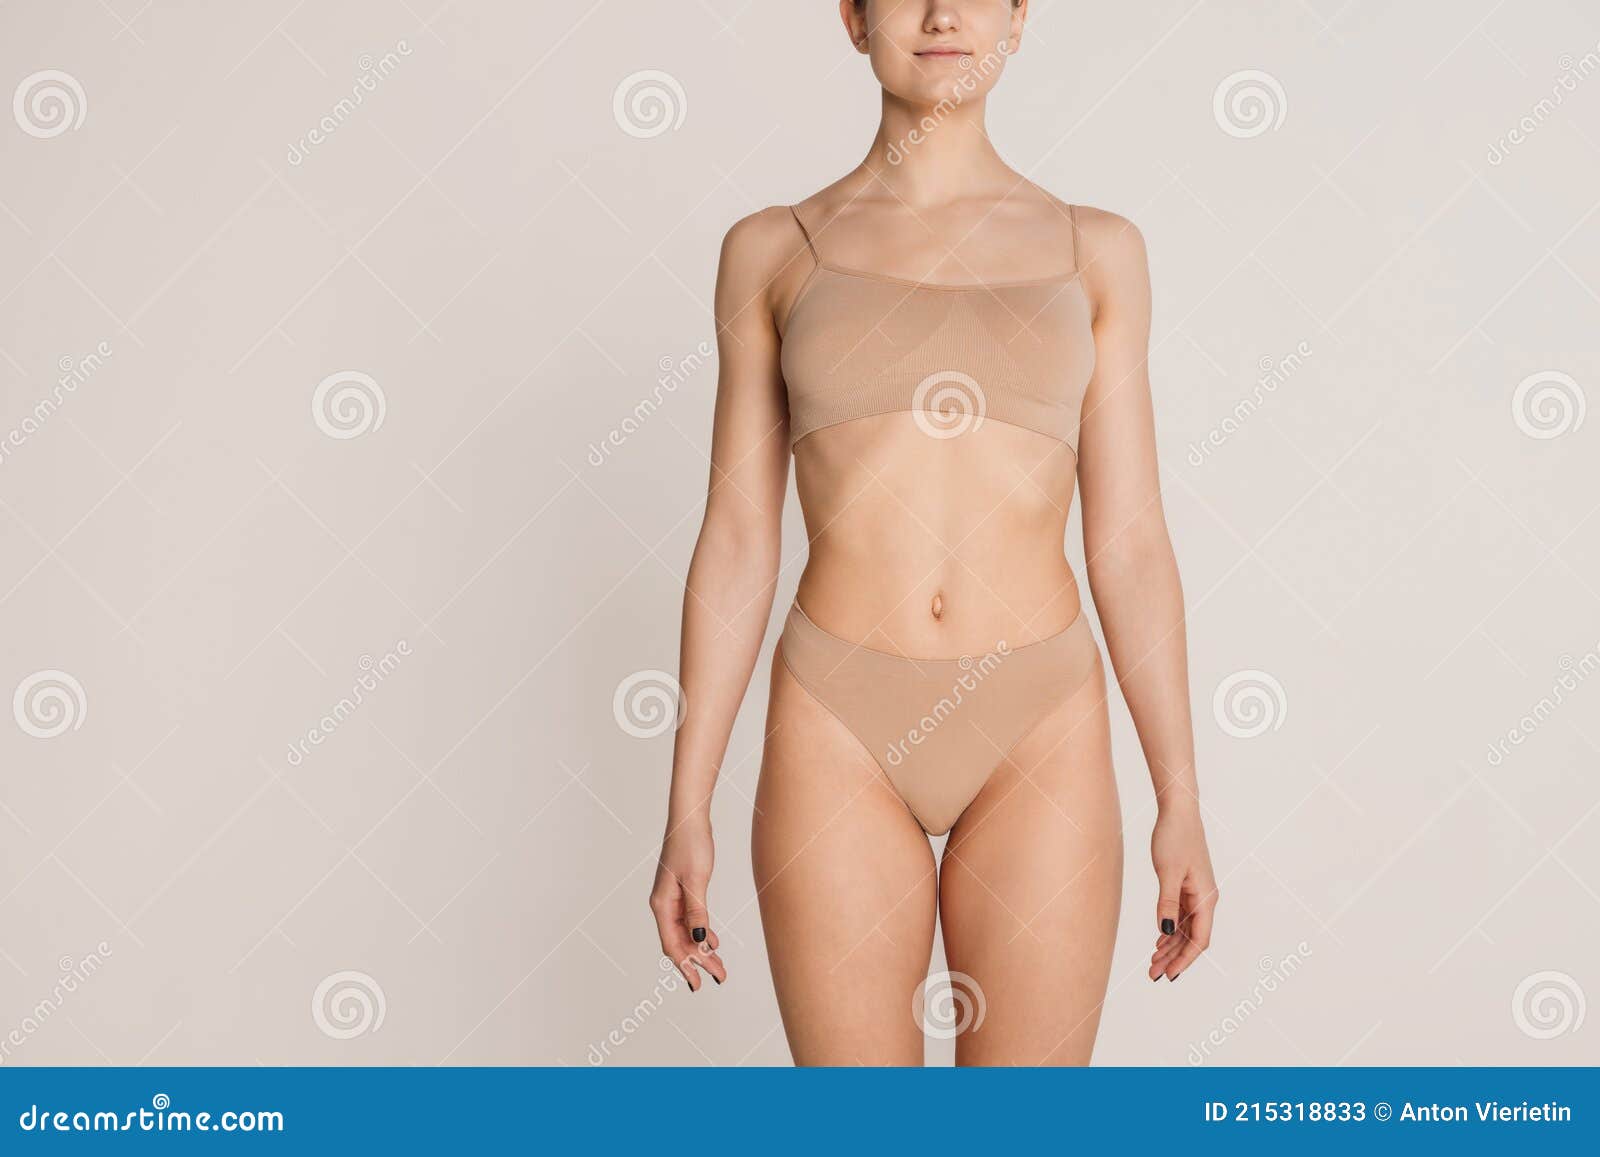 Beautiful Slim Female Body in Nude Color Underwear Over Grey Background.  Stock Image - Image of fashion, nude: 215318833